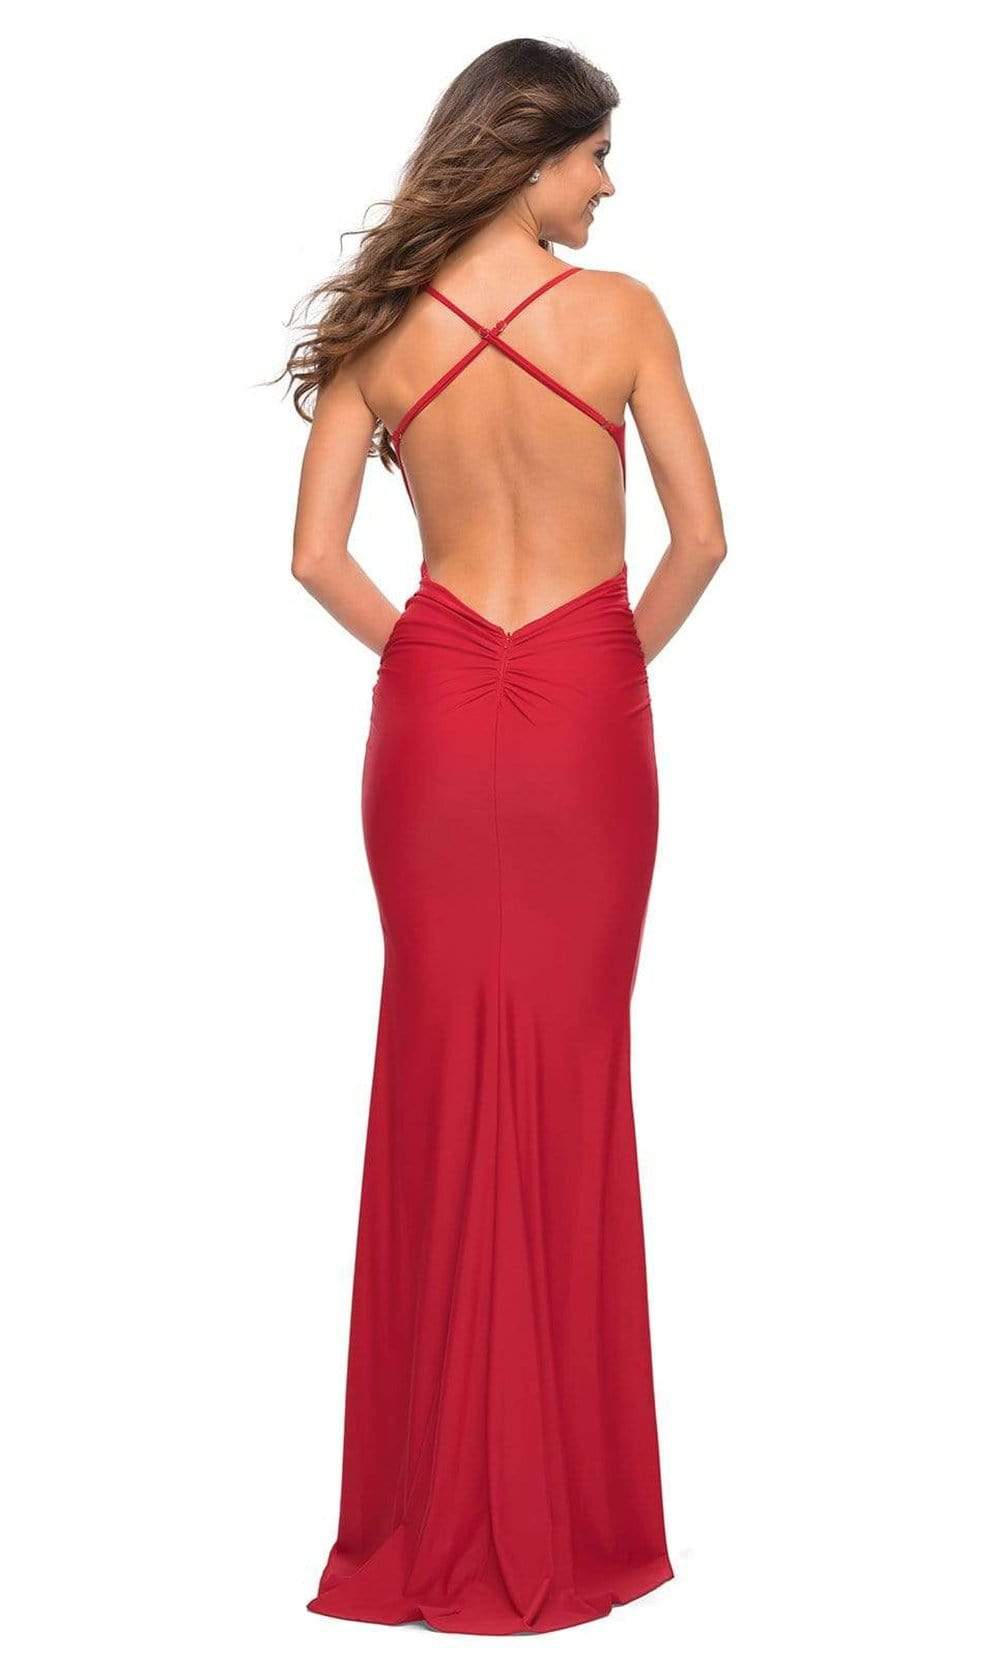 La Femme - 30471 Knot Style Long Gown Special Occasion Dress